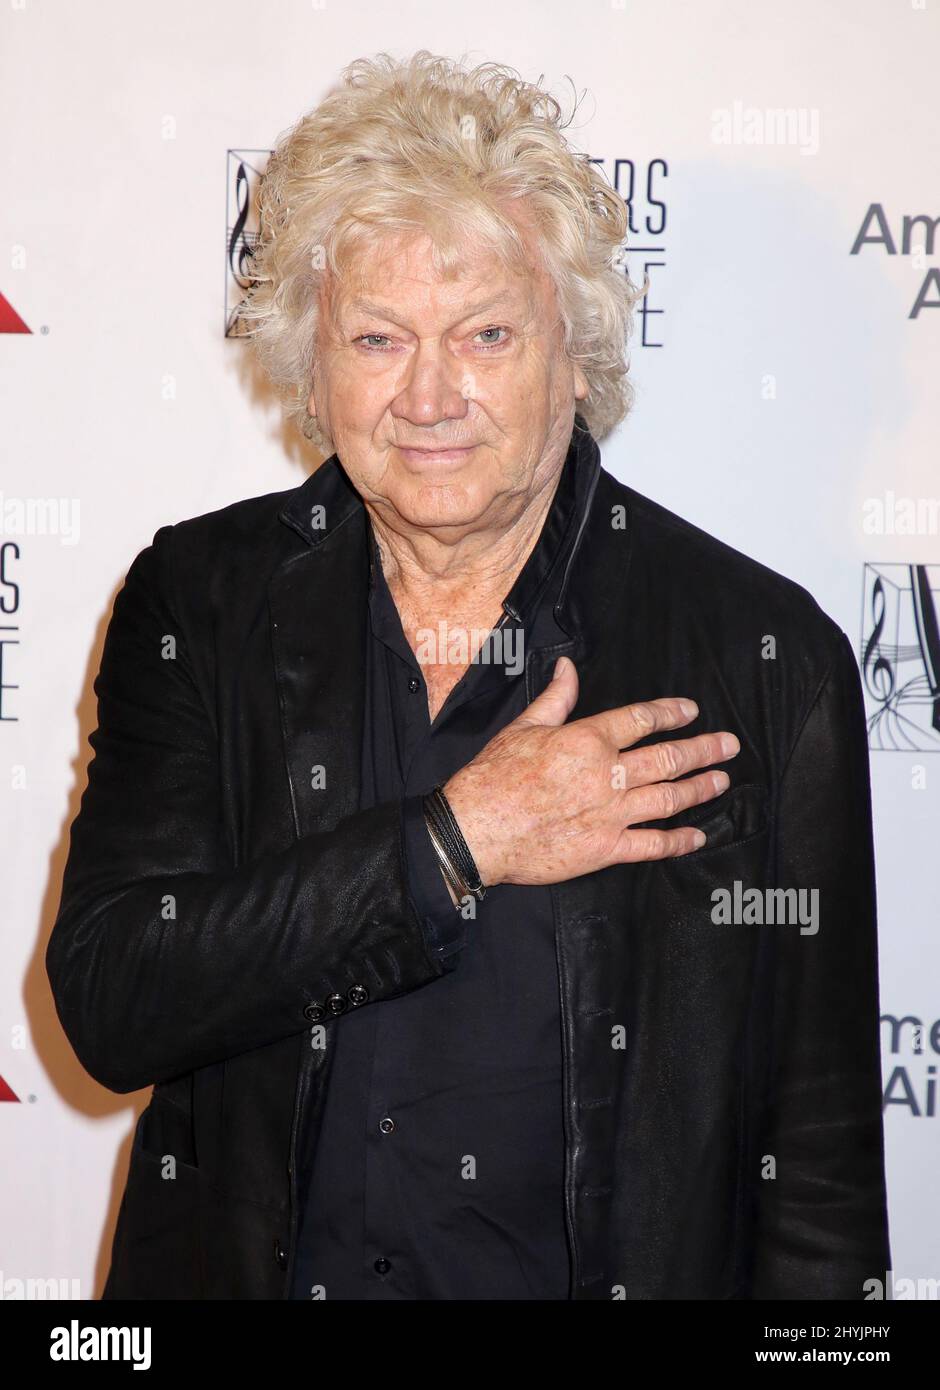 John Lodge attending the Songwriters Hall of Fame 50th Annual Induction and Awards Gala held at the Marriott Marquis Hotel on June 13, 2019 in New York City, NY Stock Photo